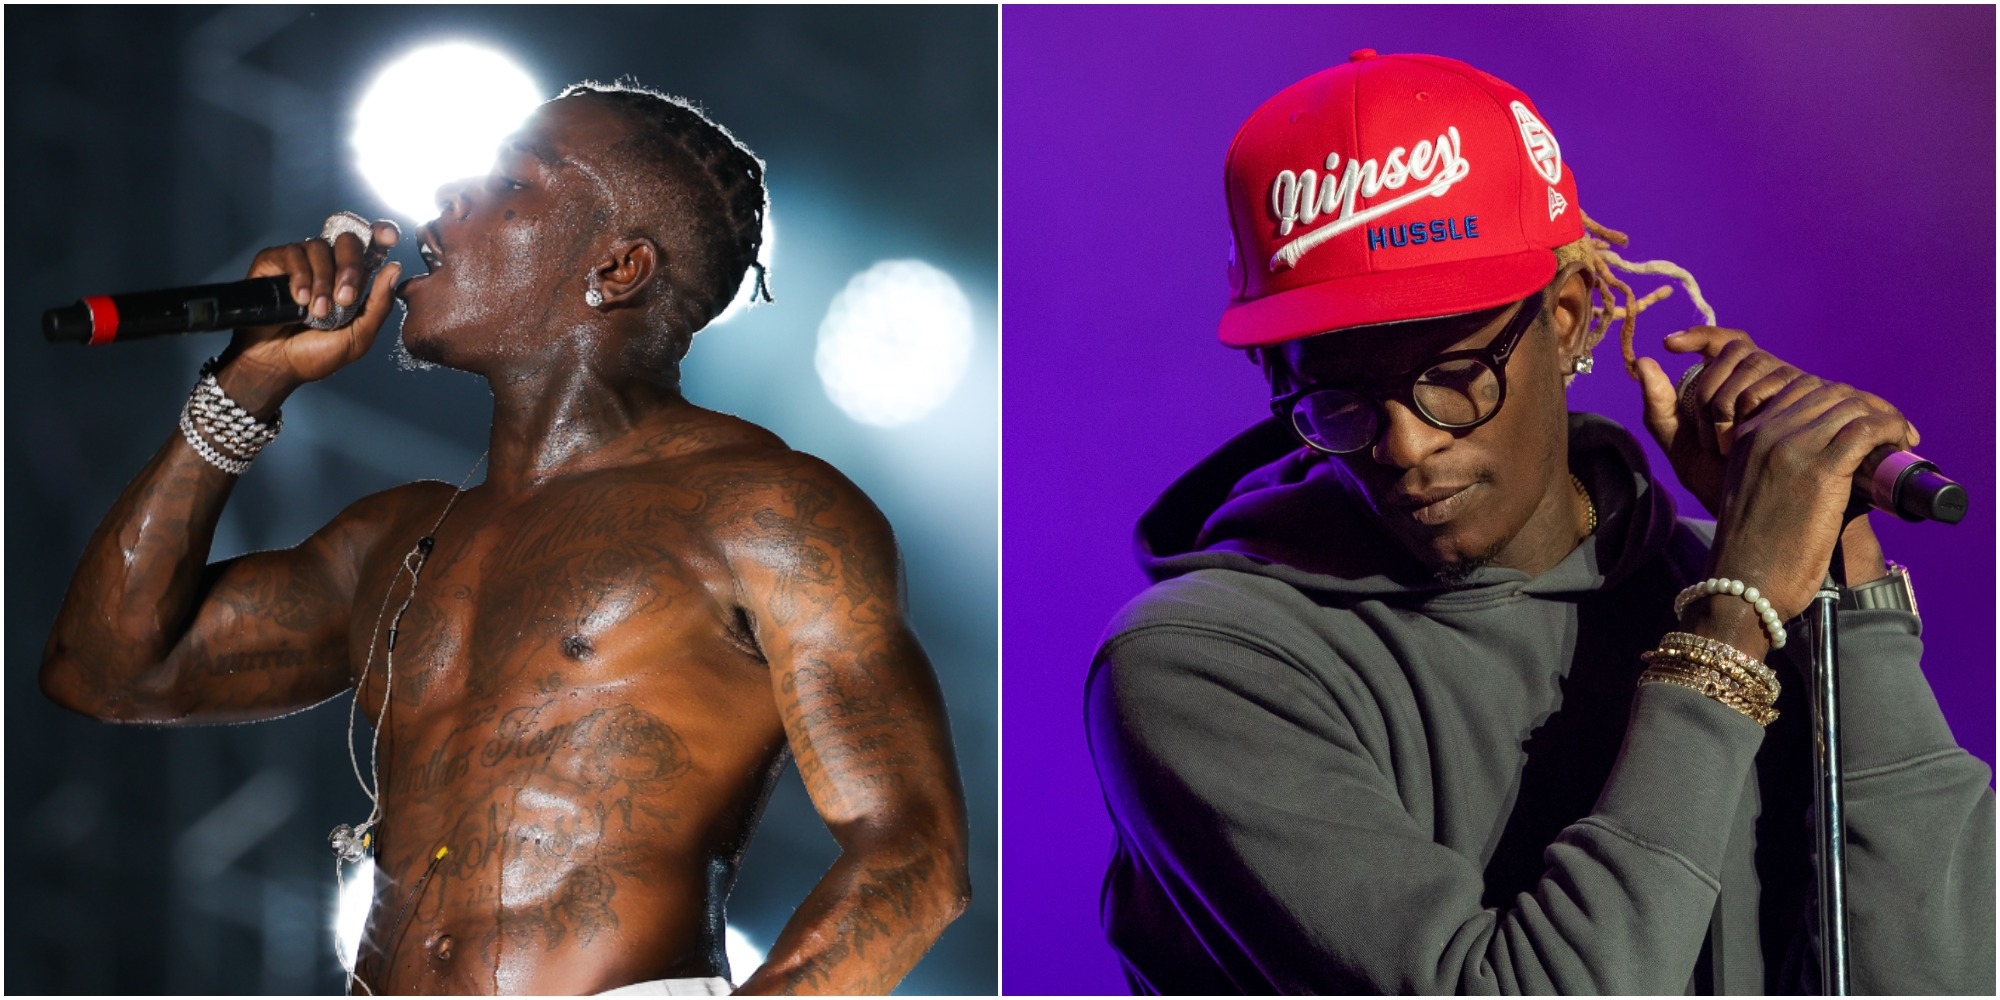 Lollapalooza drops DaBaby over homophobic remarks, replaces him with Young Thug